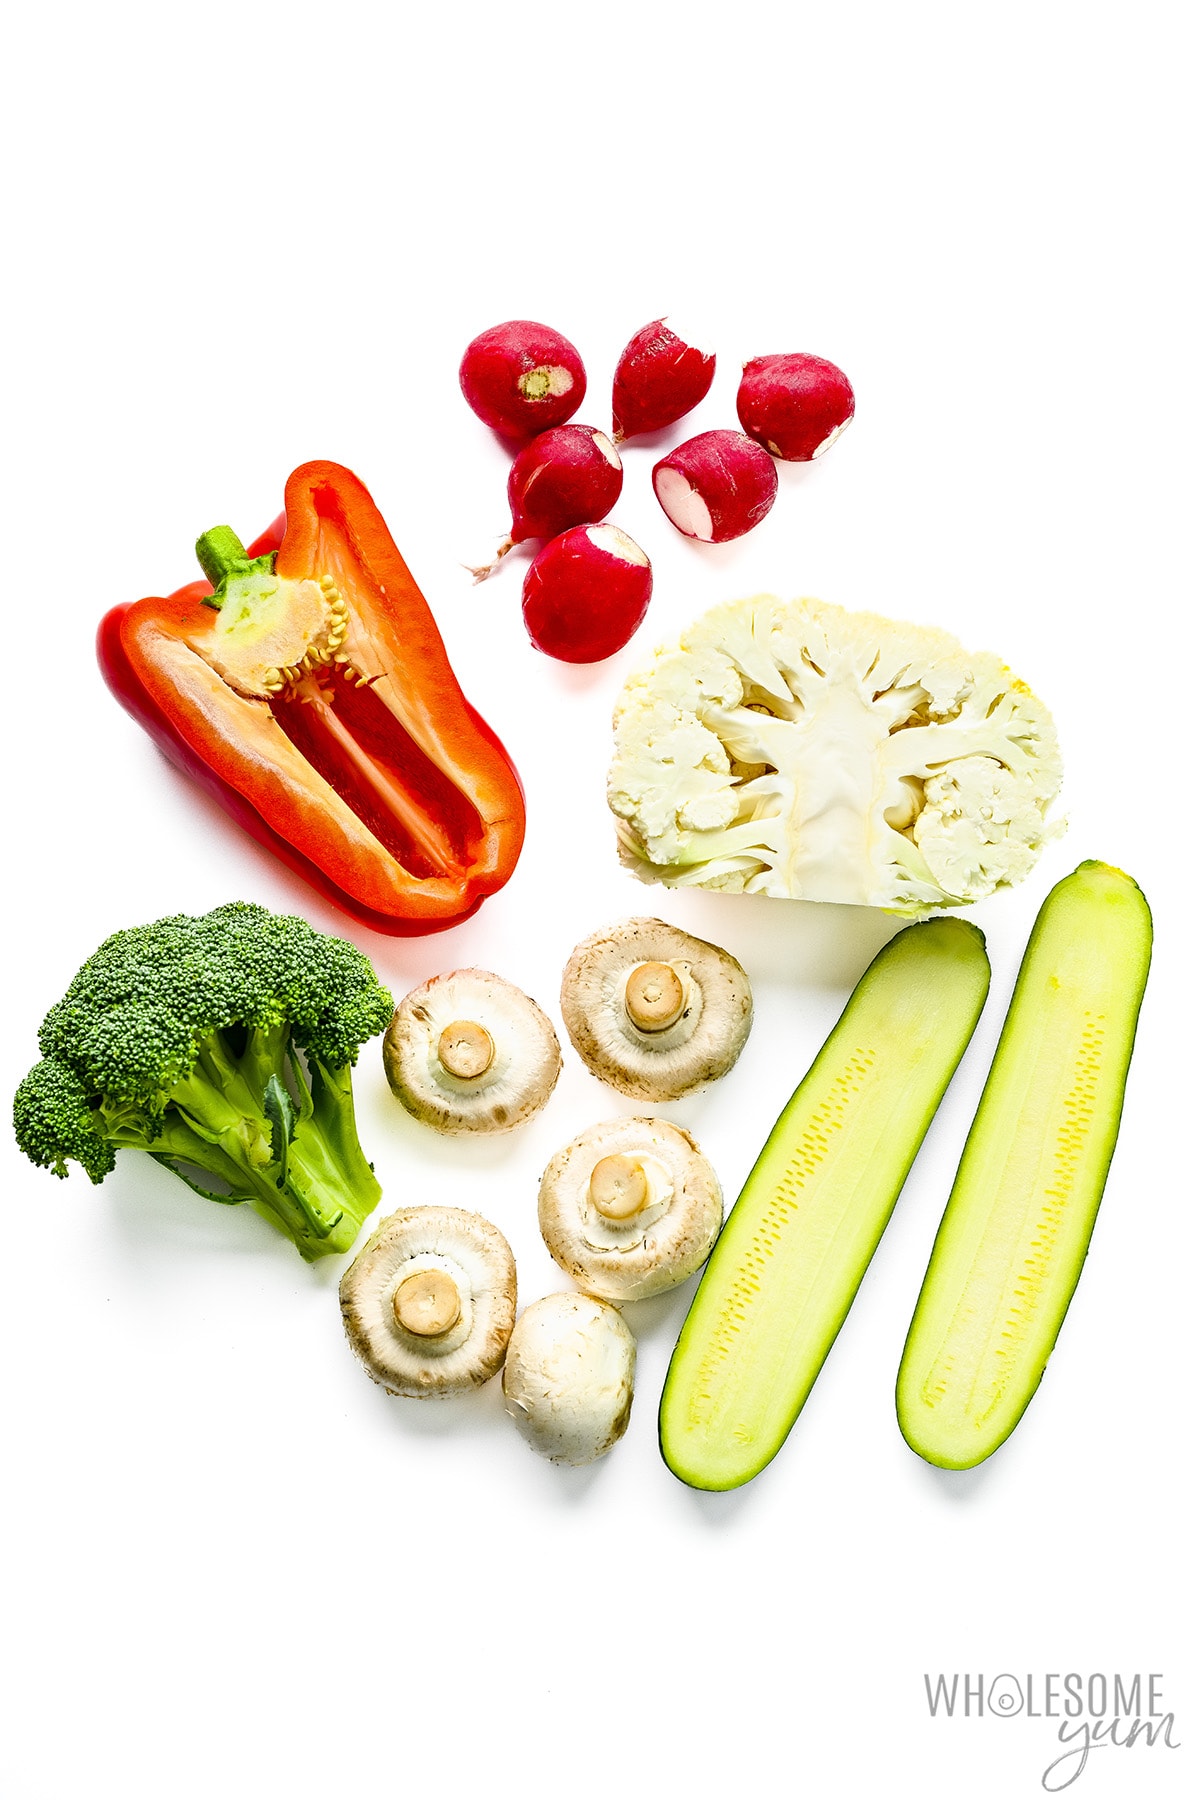 Low carb vegetables including broccoli, bell pepper, and cauliflower.